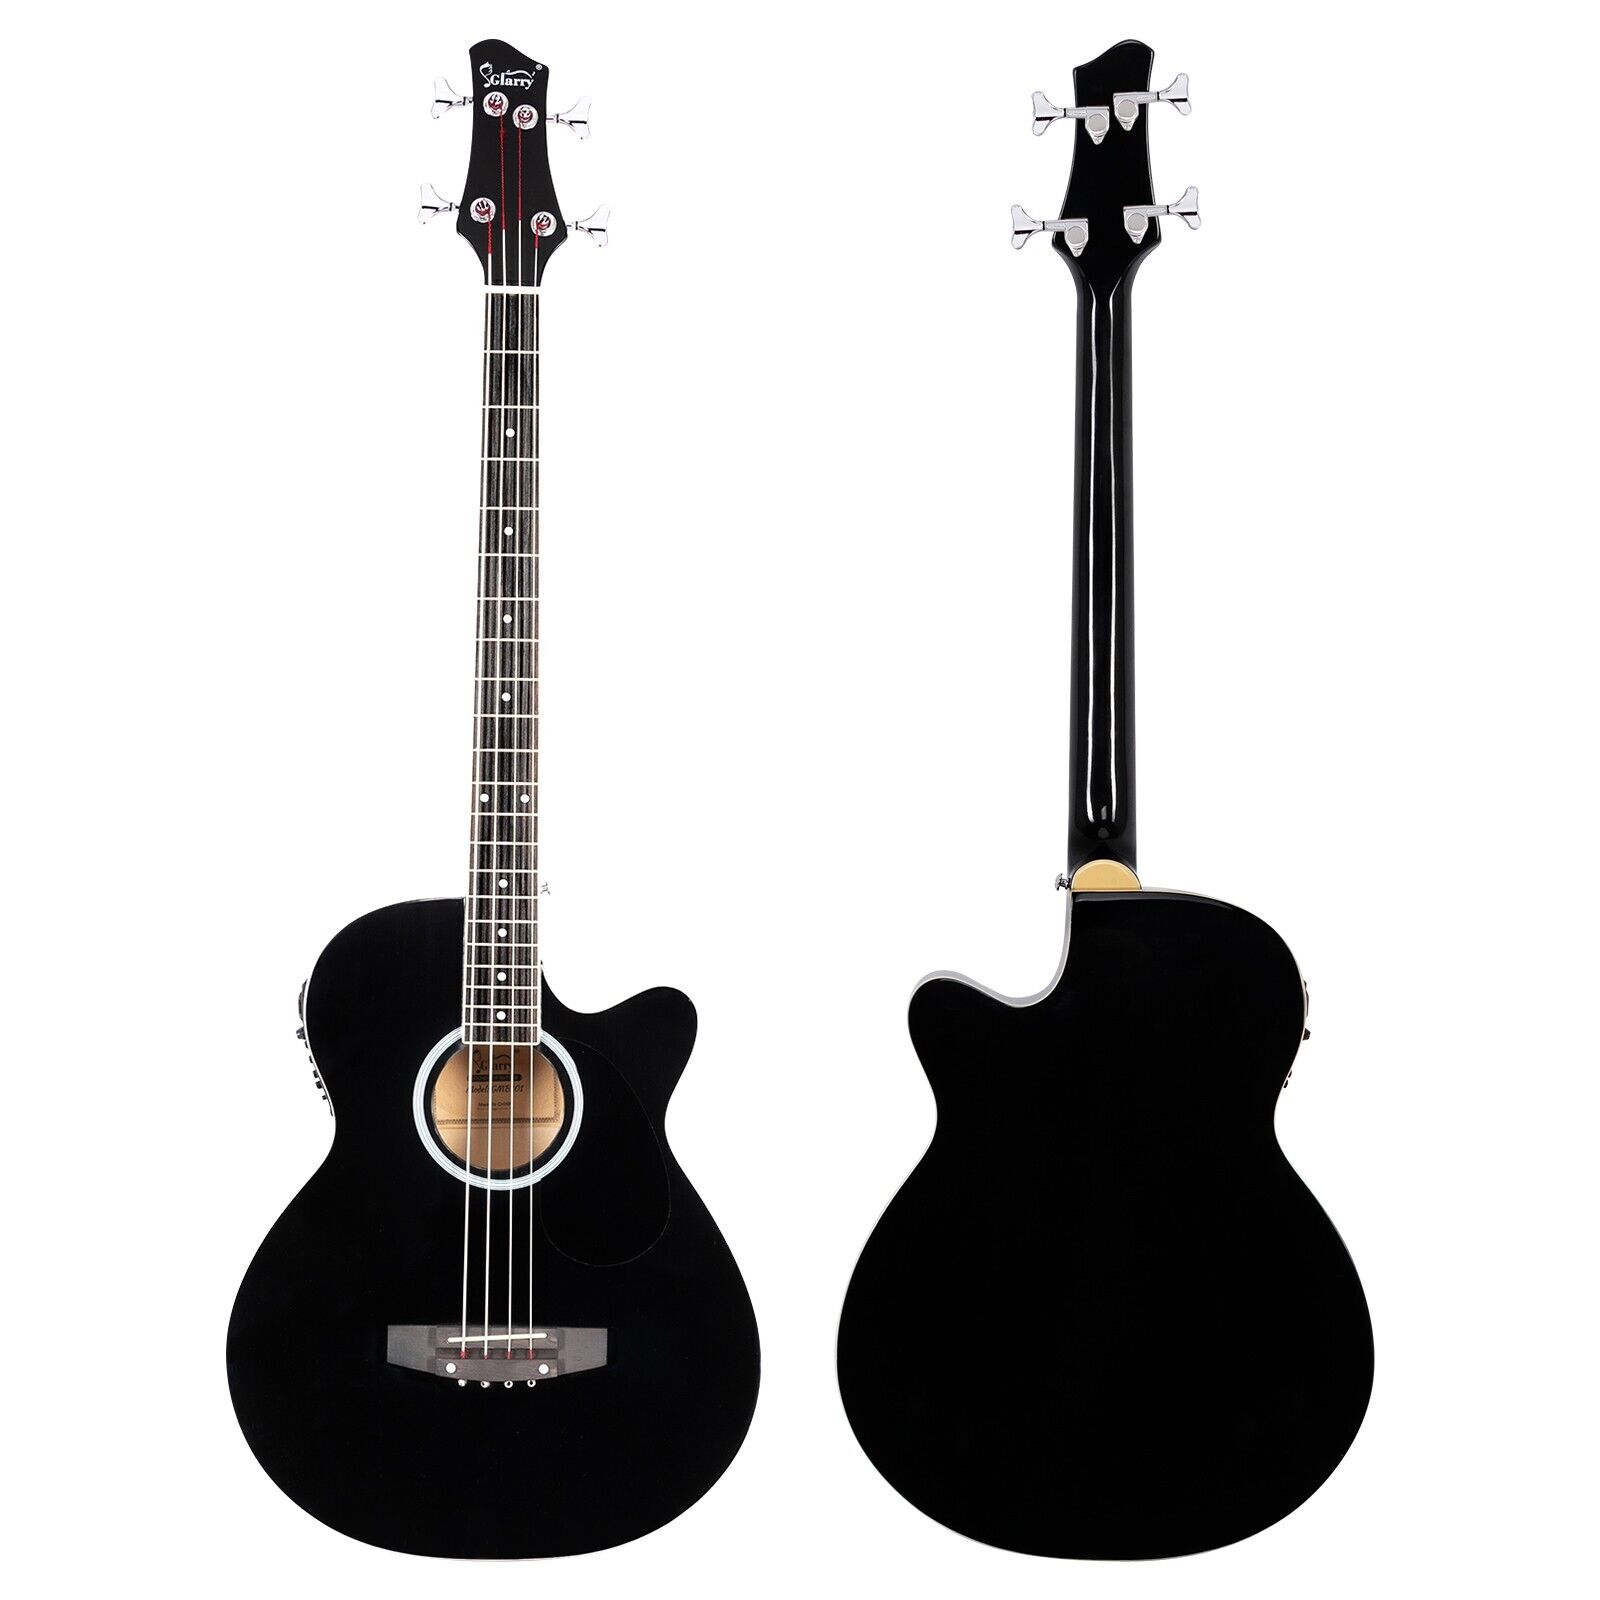 Glarry GMB101 Black 4 string Electric Acoustic Bass Guitar w/ 4-Band Equalizer 4